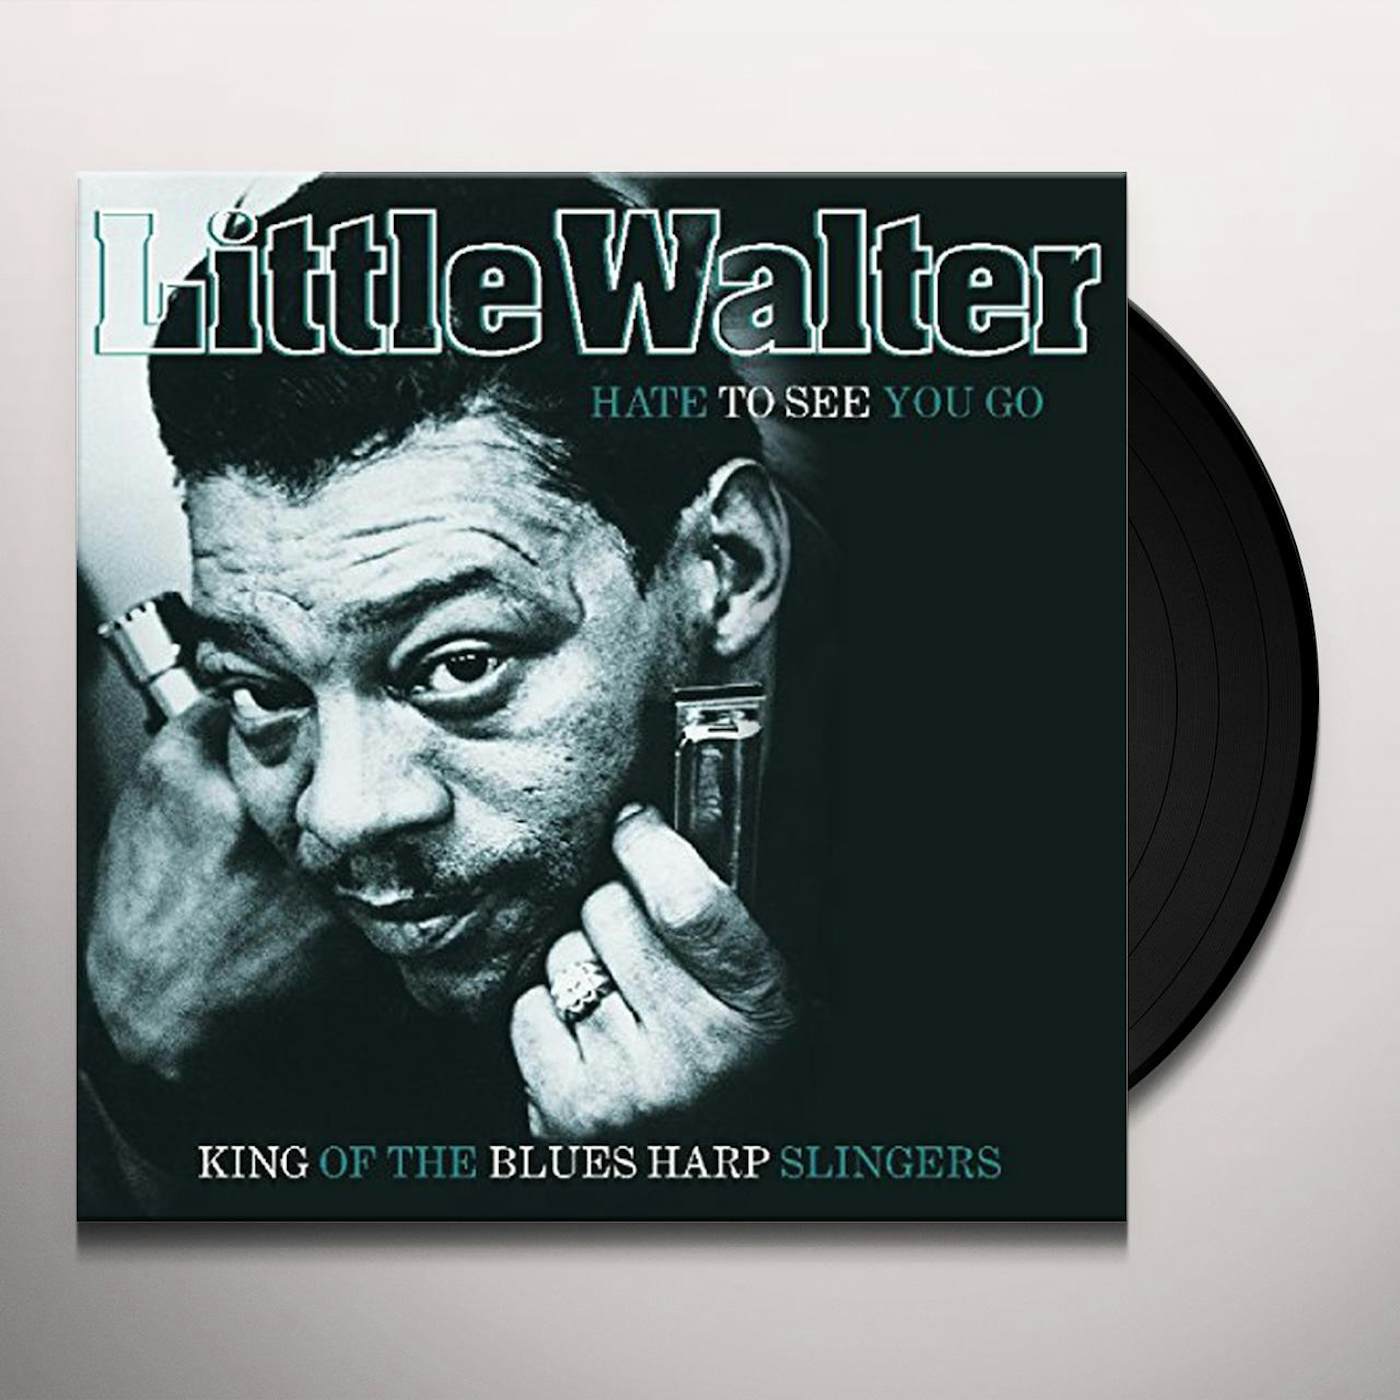 Little Walter HATE TO SEE YOU GO - KING OF THE BLUES HARP SLINGERS (180G) Vinyl Record